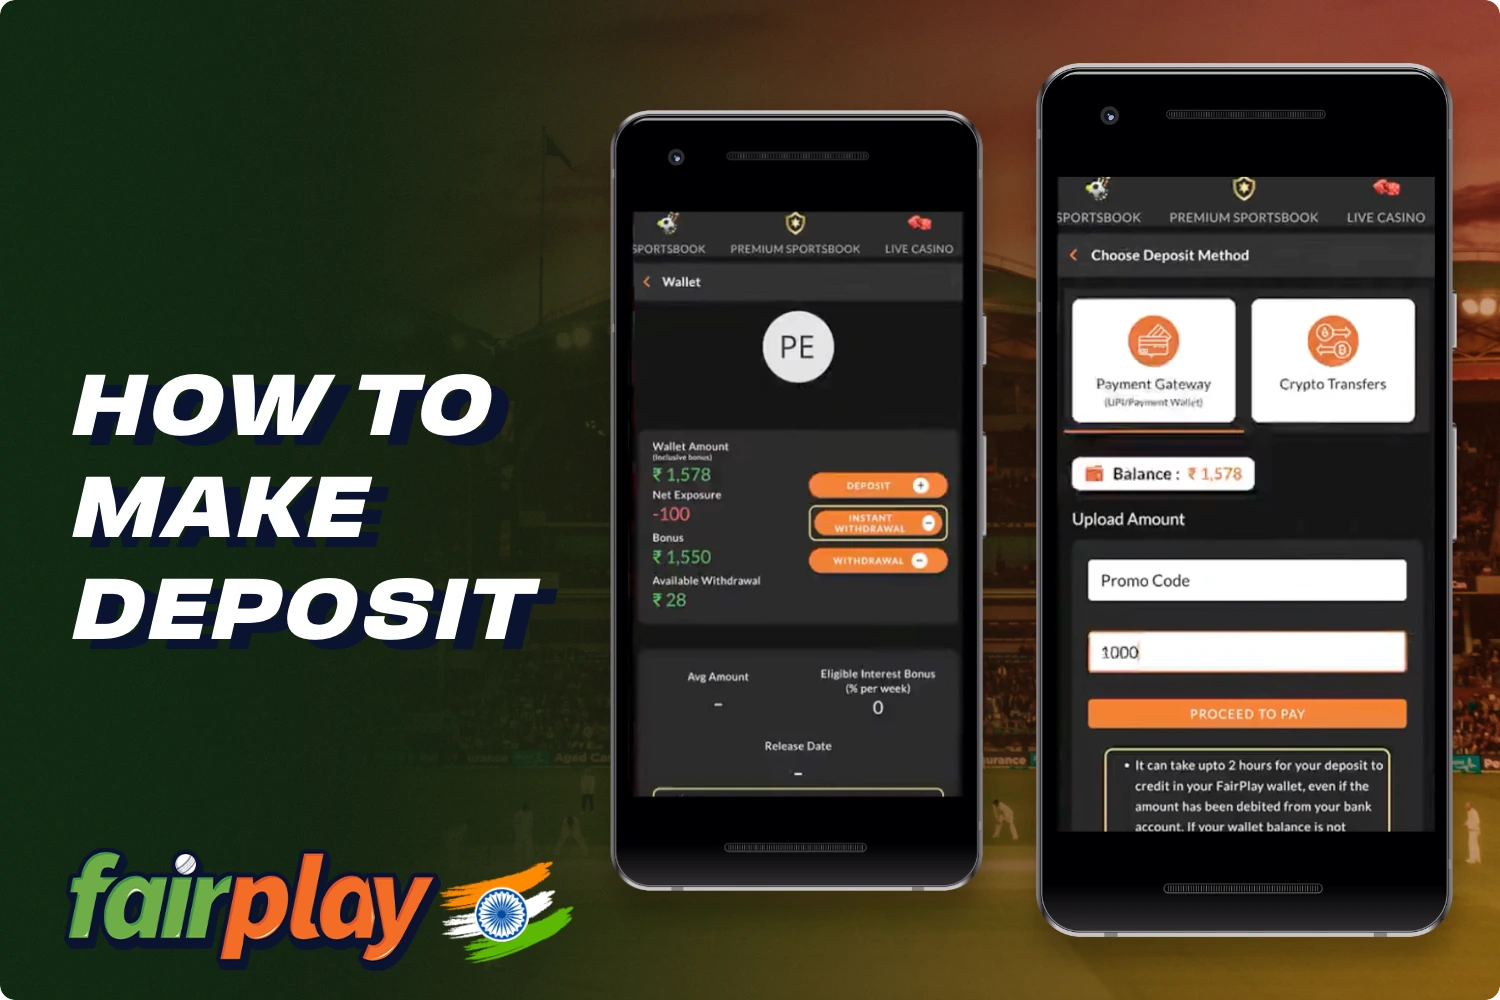 To make a deposit on the Fairplay website or app you need to follow a few simple steps